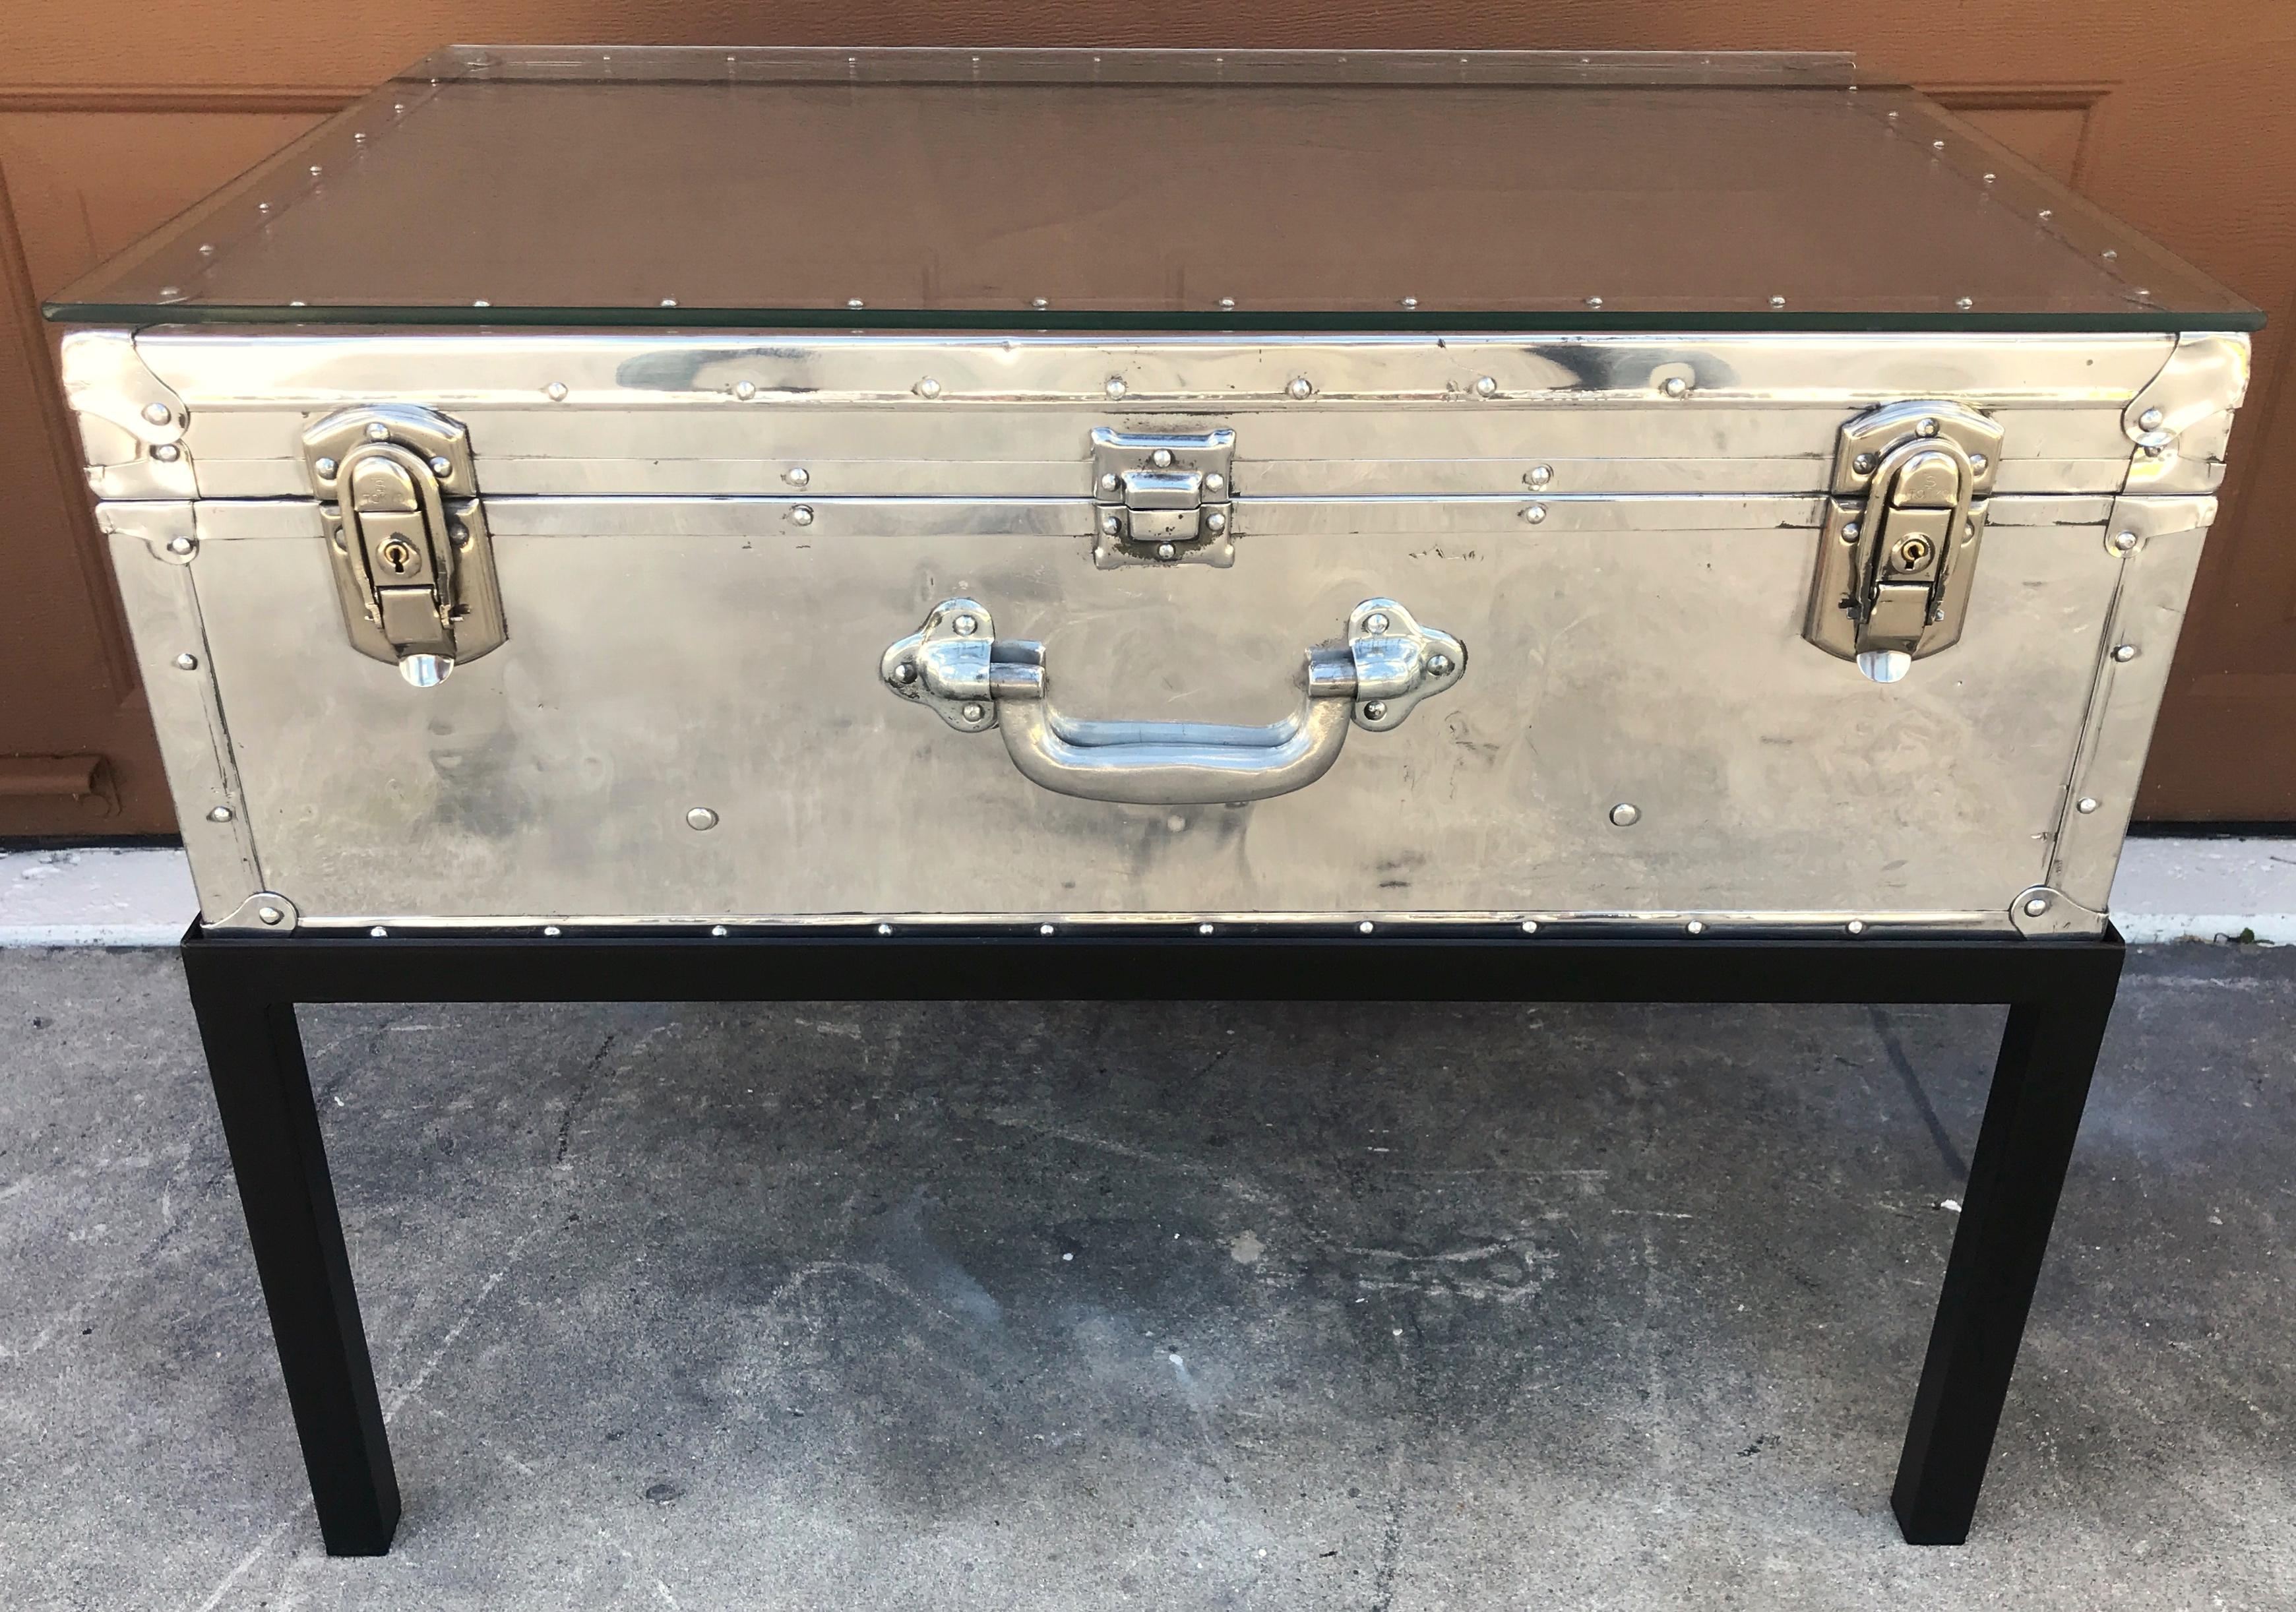 Japanese post war aluminum riveted trunk on iron stand with glass top, restored
Stamped TS Tokyo on the lock, at the time of posting we have another trunk and stand LU2592316549342
Each item consists of a custom glass top, trunk and iron